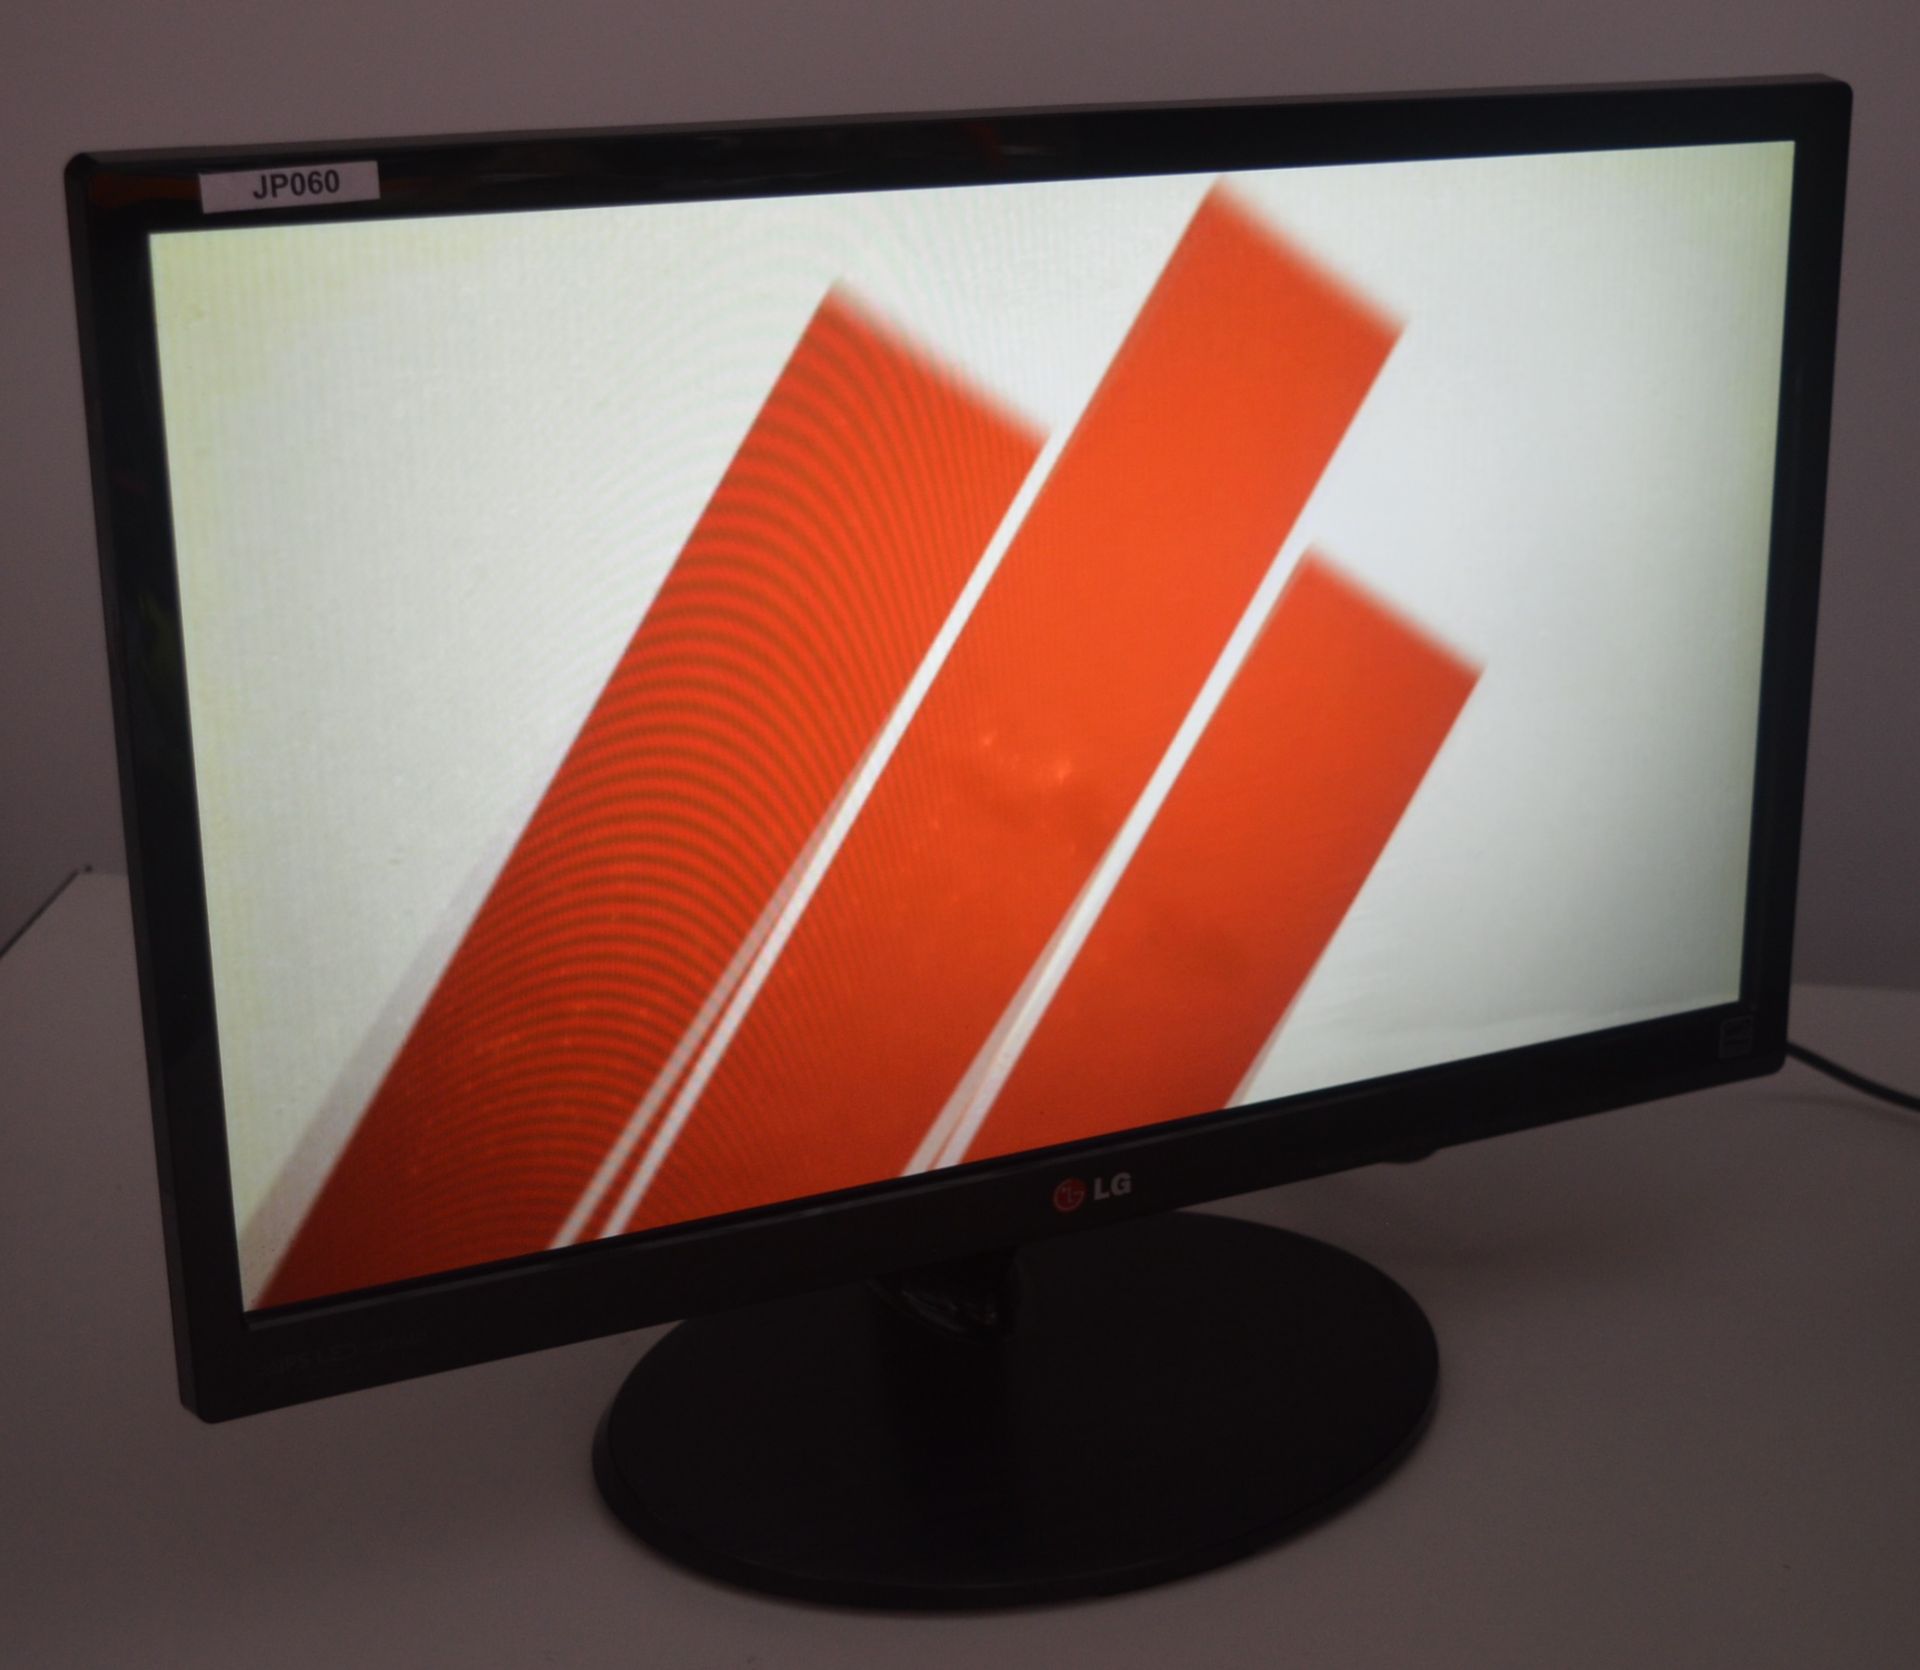 1 x LG Flat Screen IPS LED 22 Inch Monitor - 1920x1080 Resolution - HDMI Connection - Full HD - Image 6 of 6